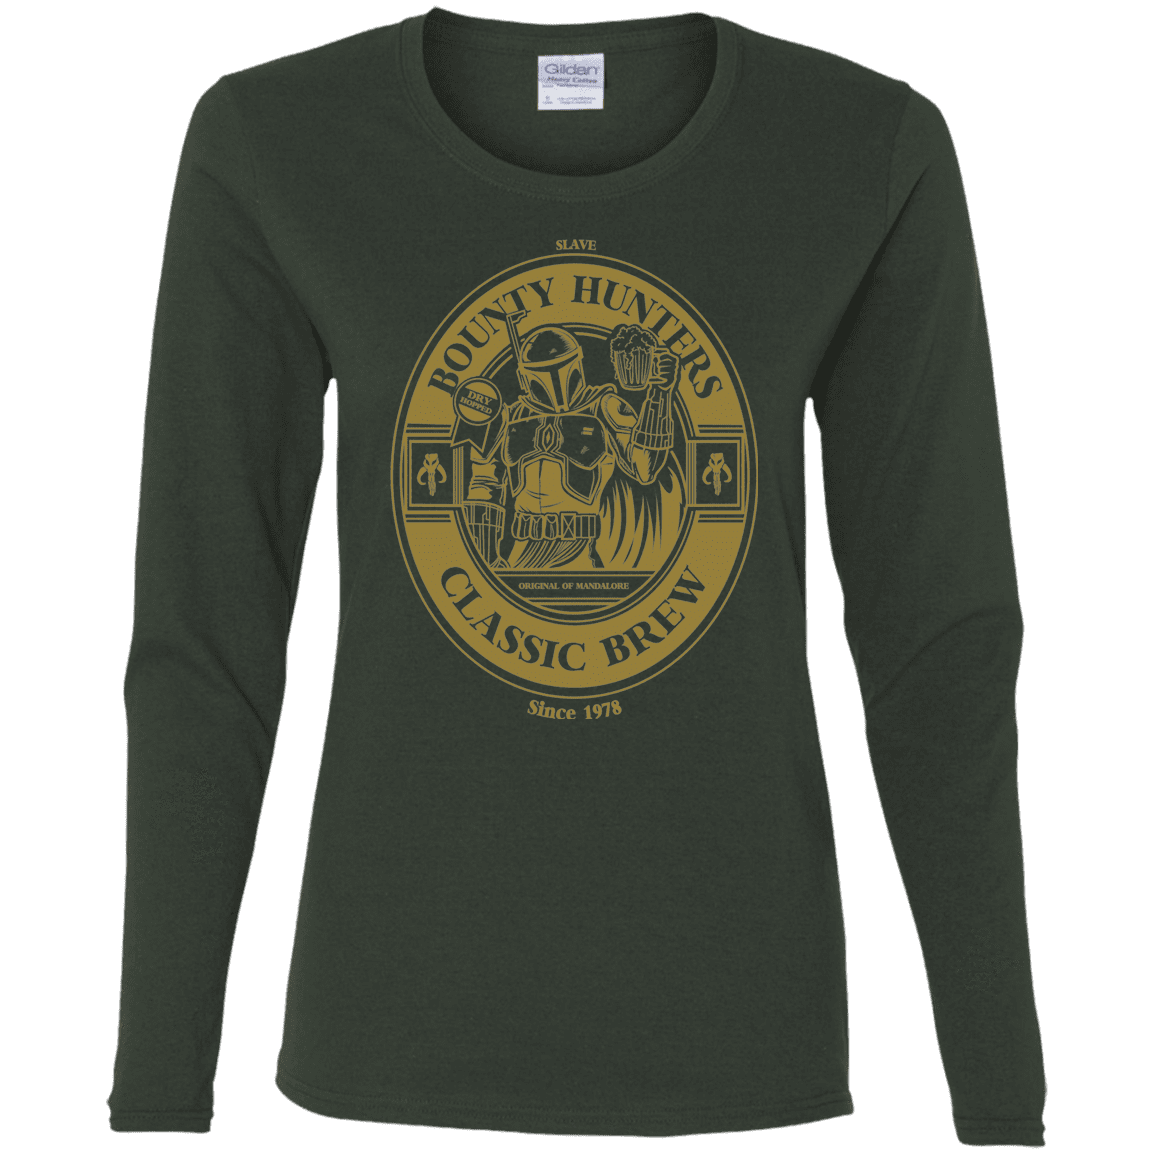 T-Shirts Forest / S Bounty Hunters Classic Brew Women's Long Sleeve T-Shirt